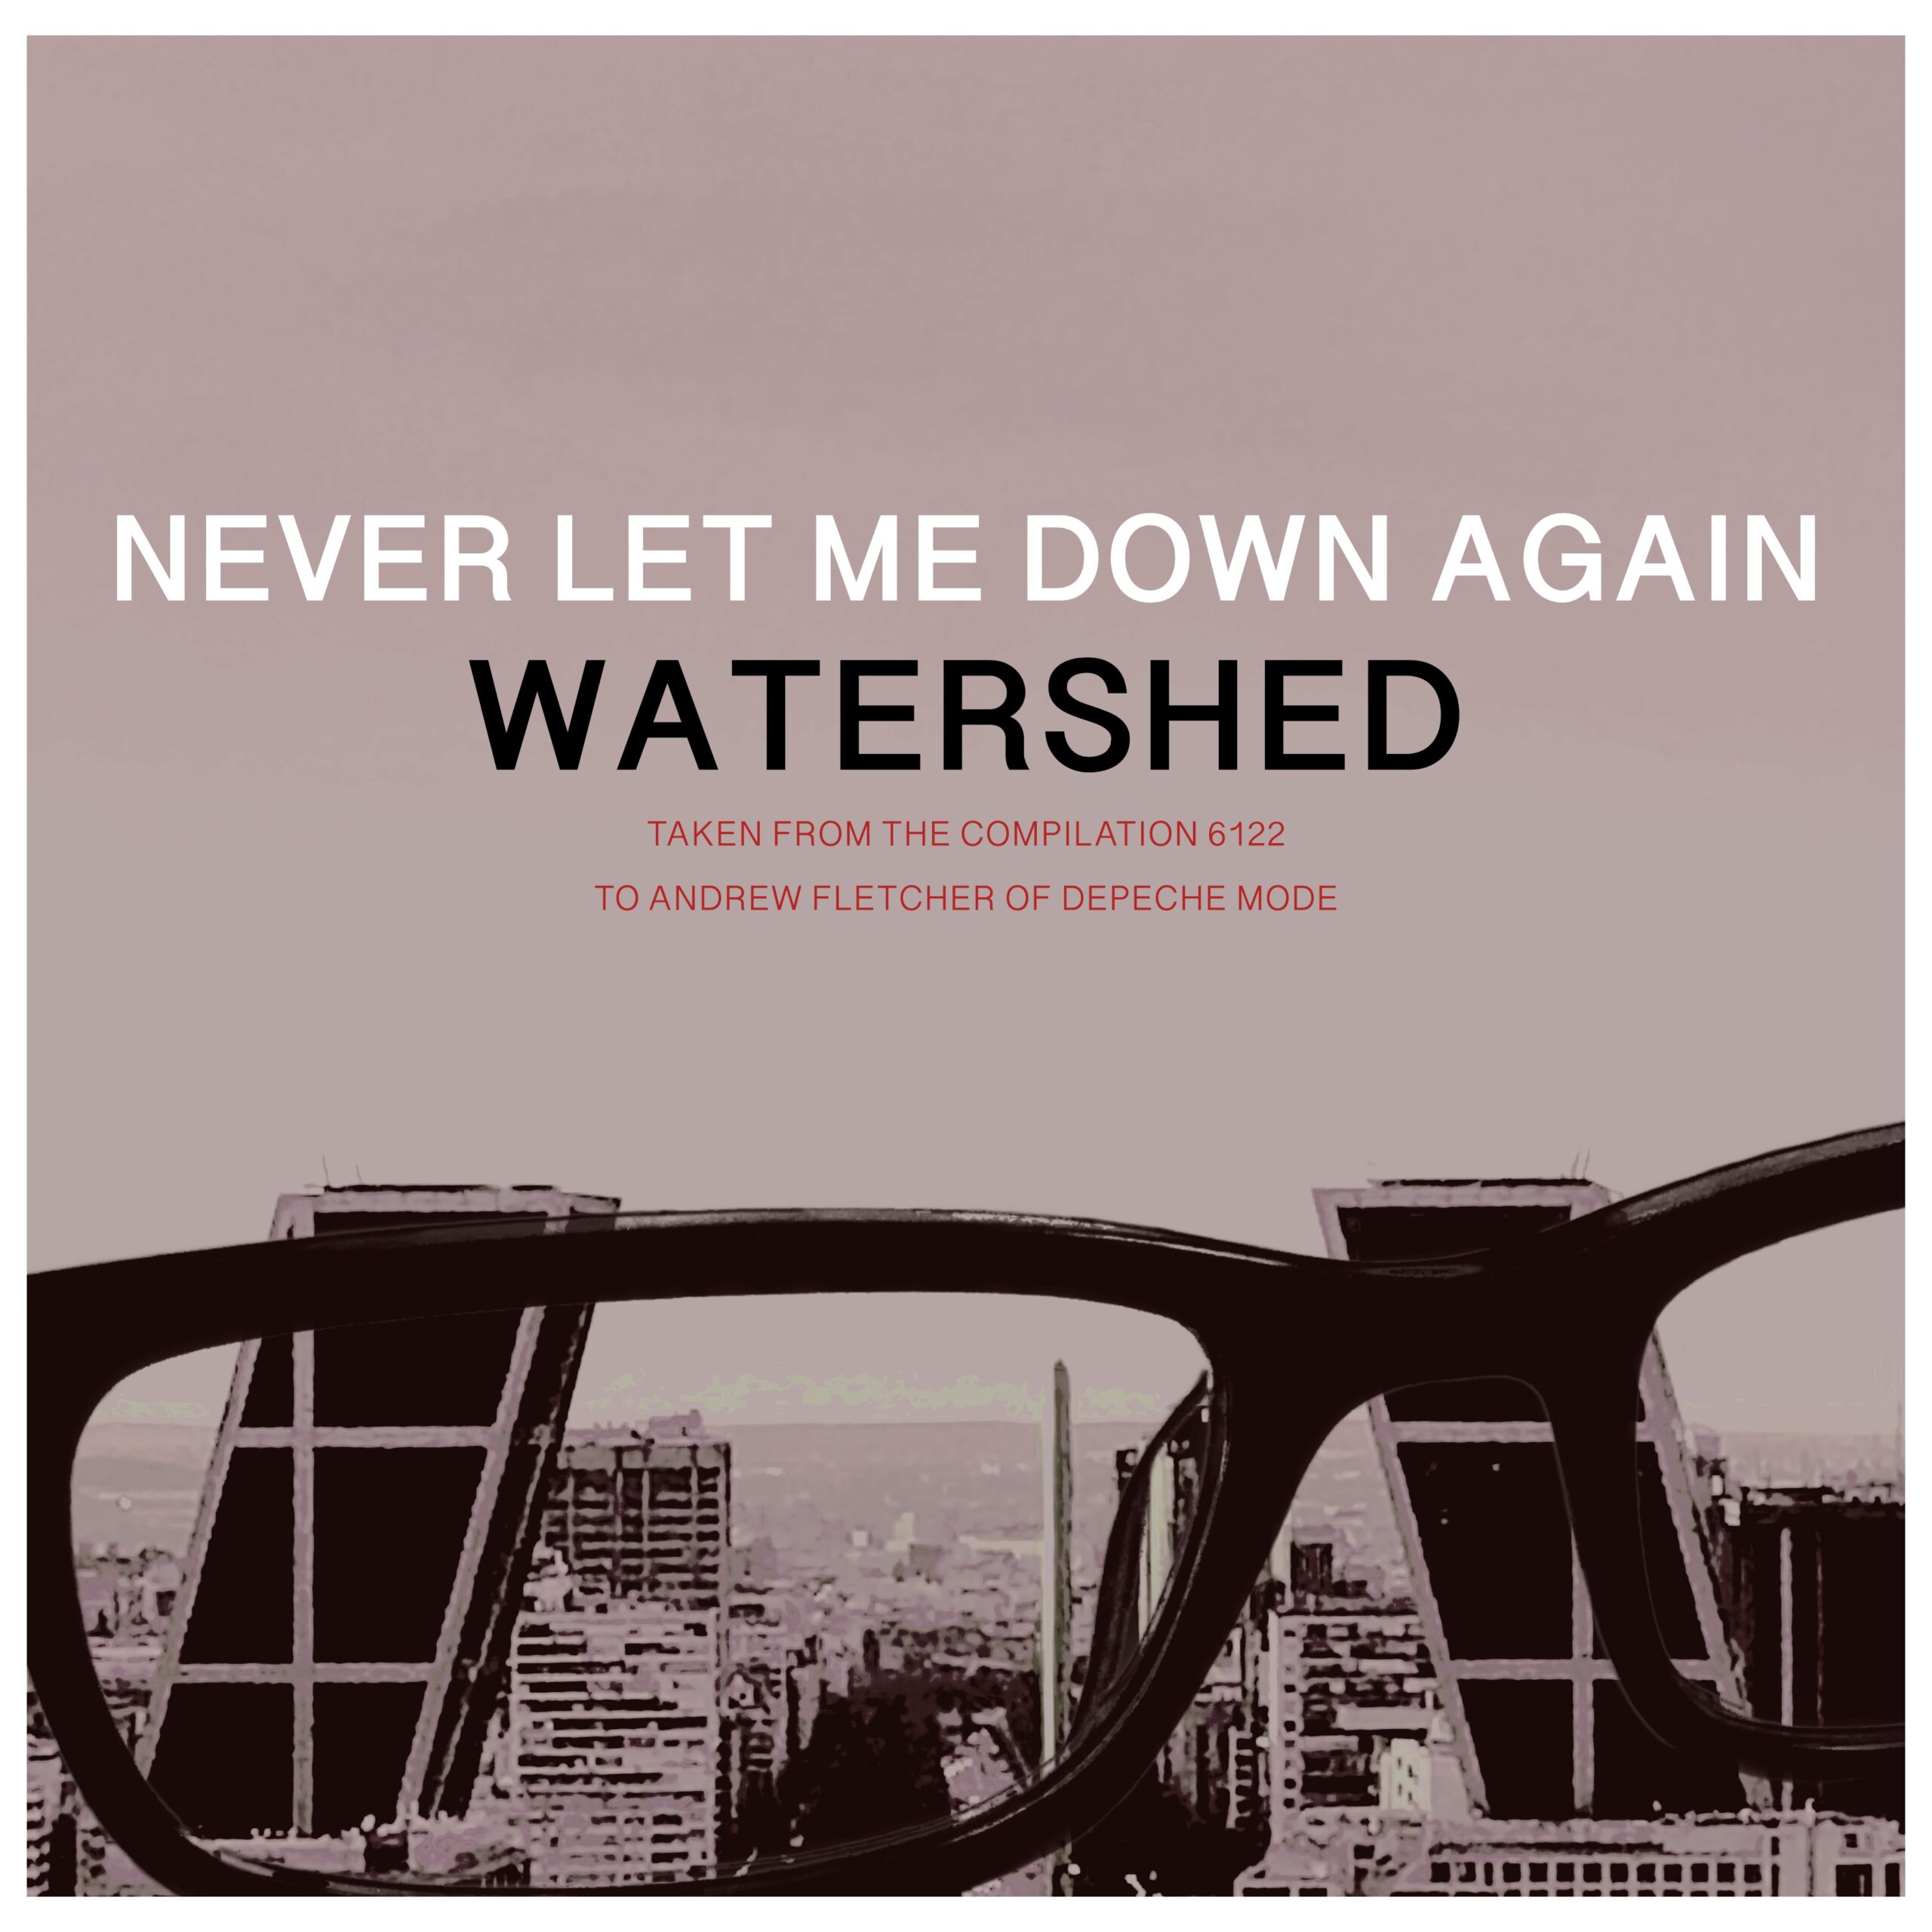 Watershed - Never Let Me Down Again Cover